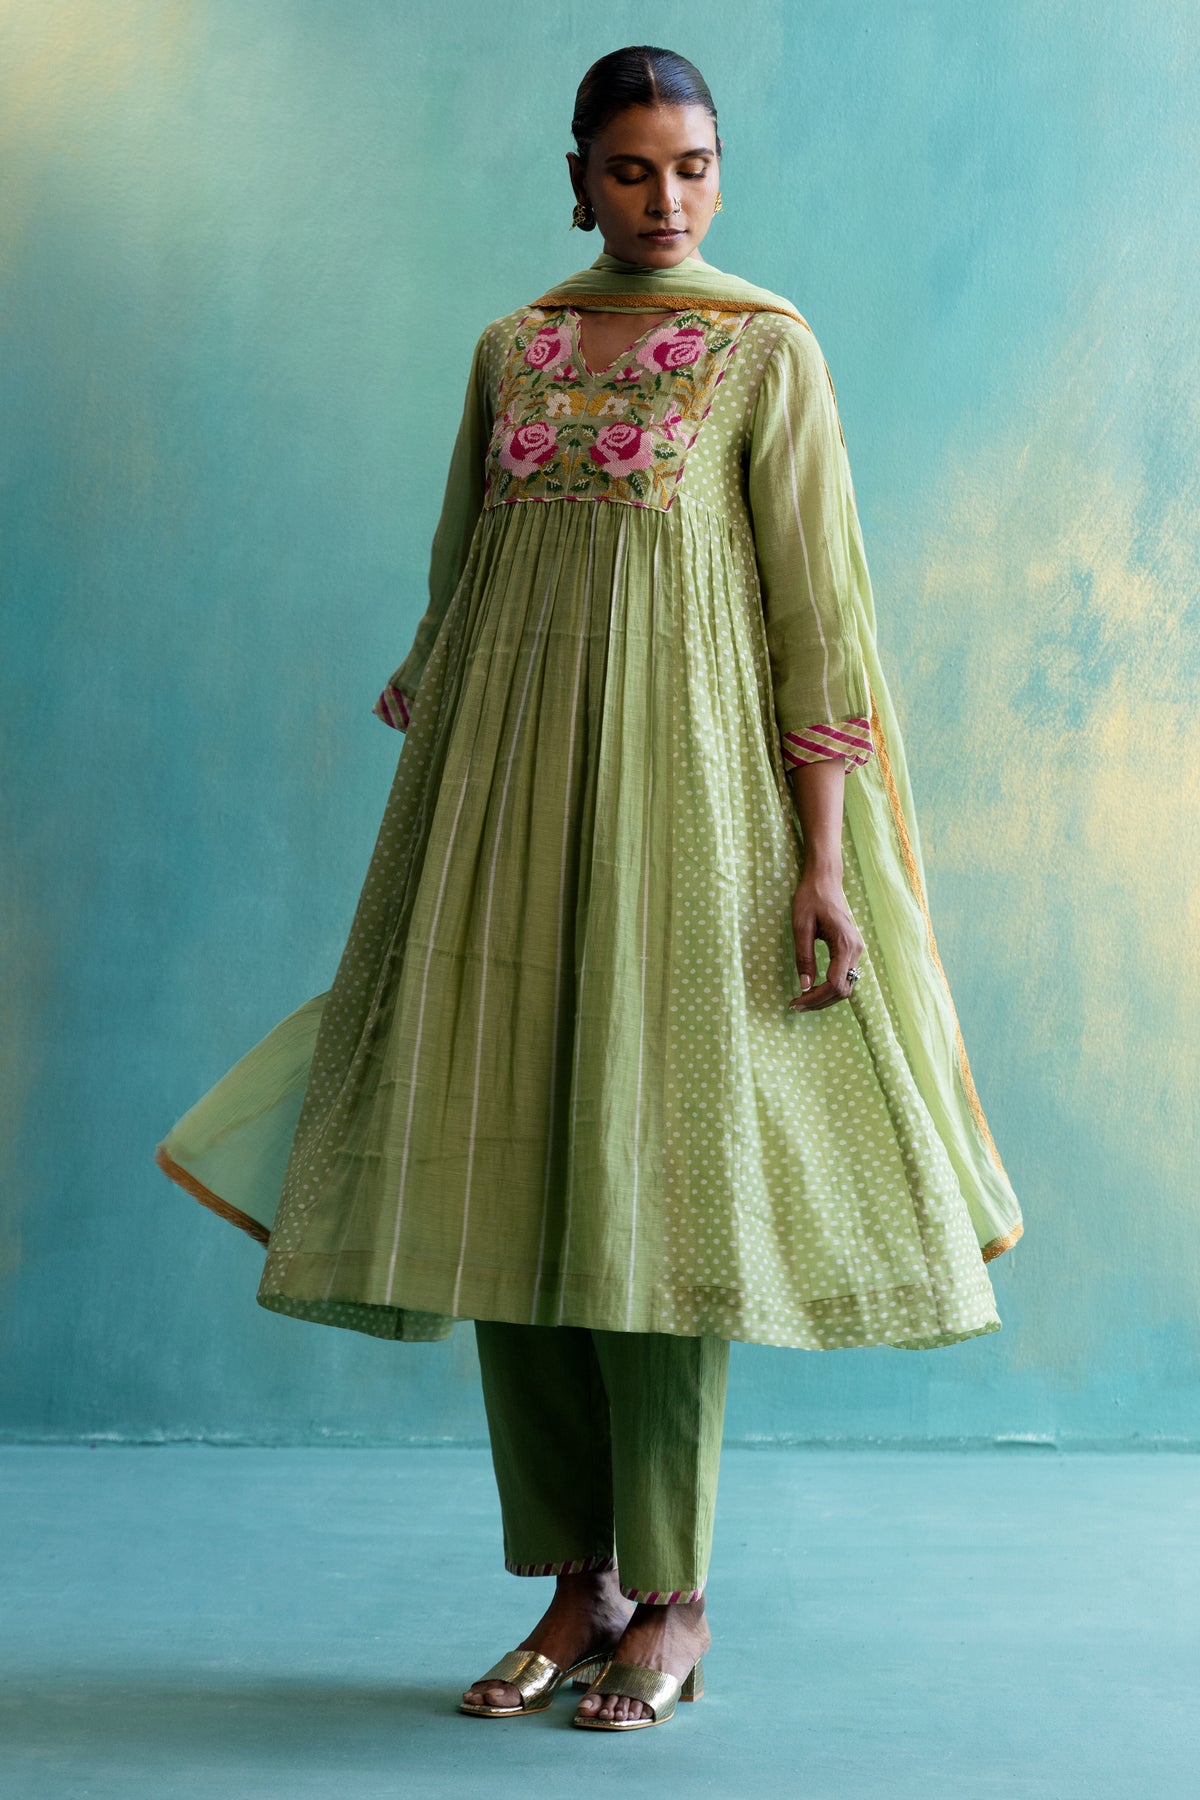 DIL-KASH OLIVE GREEN CHANDERI FRONT AND BACK FLORAL EMBROIDERY WITH SIDE PLEATS AND POLKAS KURTA SET OF 3